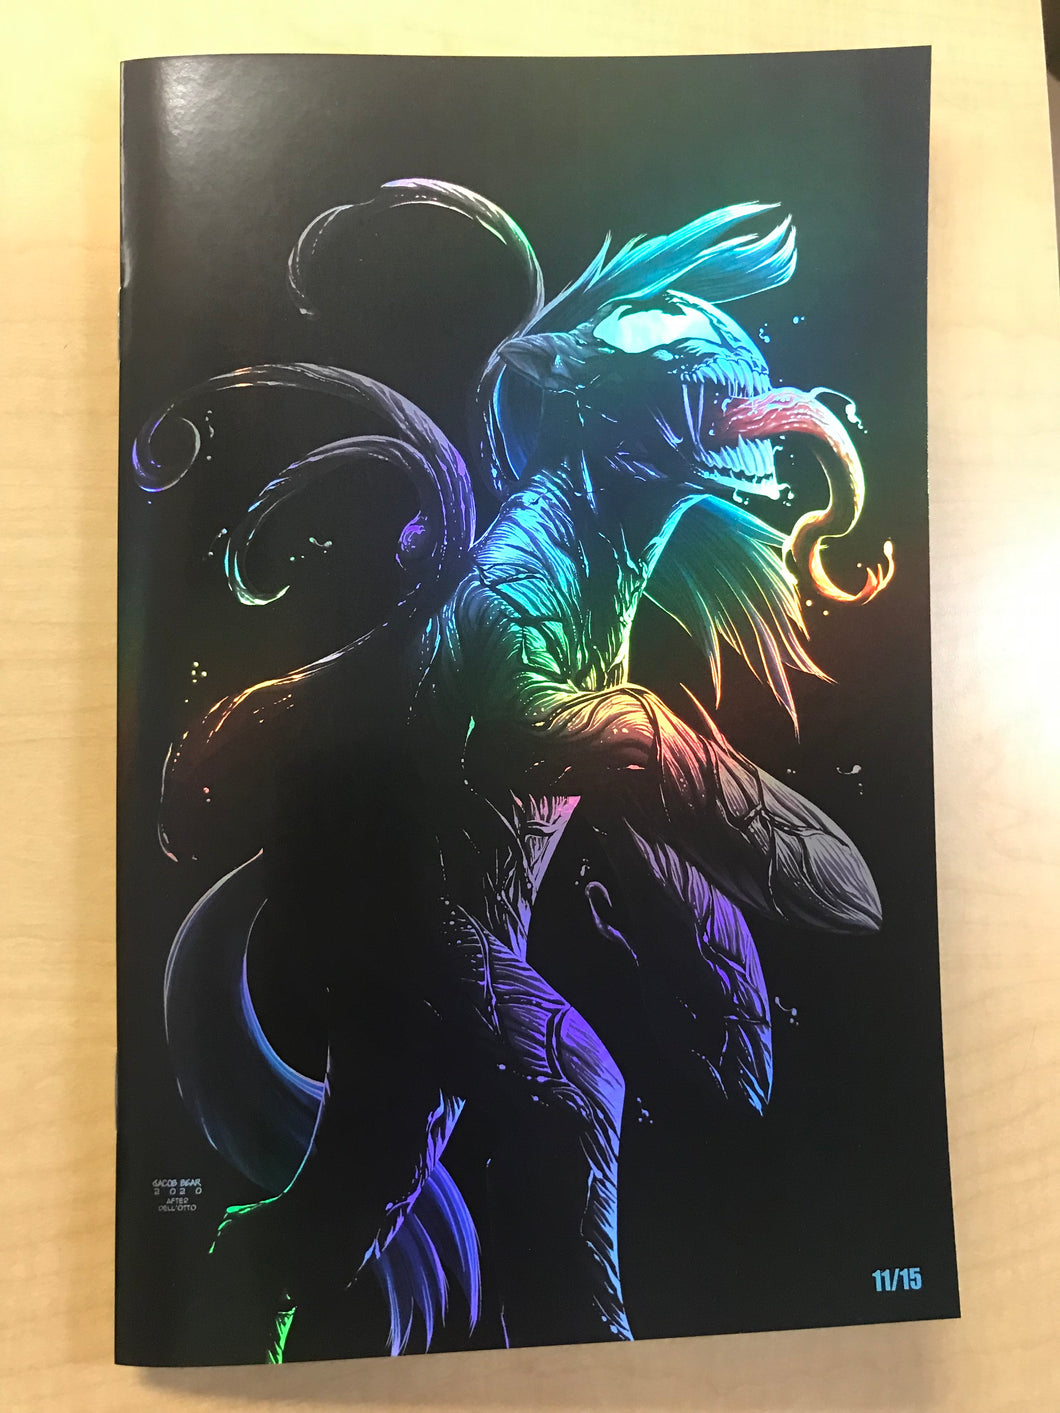 My Nightmarish Little Venomous Ponies & The Magical Friendship Zombies #1 Venom #27 Gabriele DellÓtto Unknown Comics Exclusive Homage VIRGIN CHROME Variant Cover by Jacob Bear Limited to Only 15 Serial Numbered Copies!!!